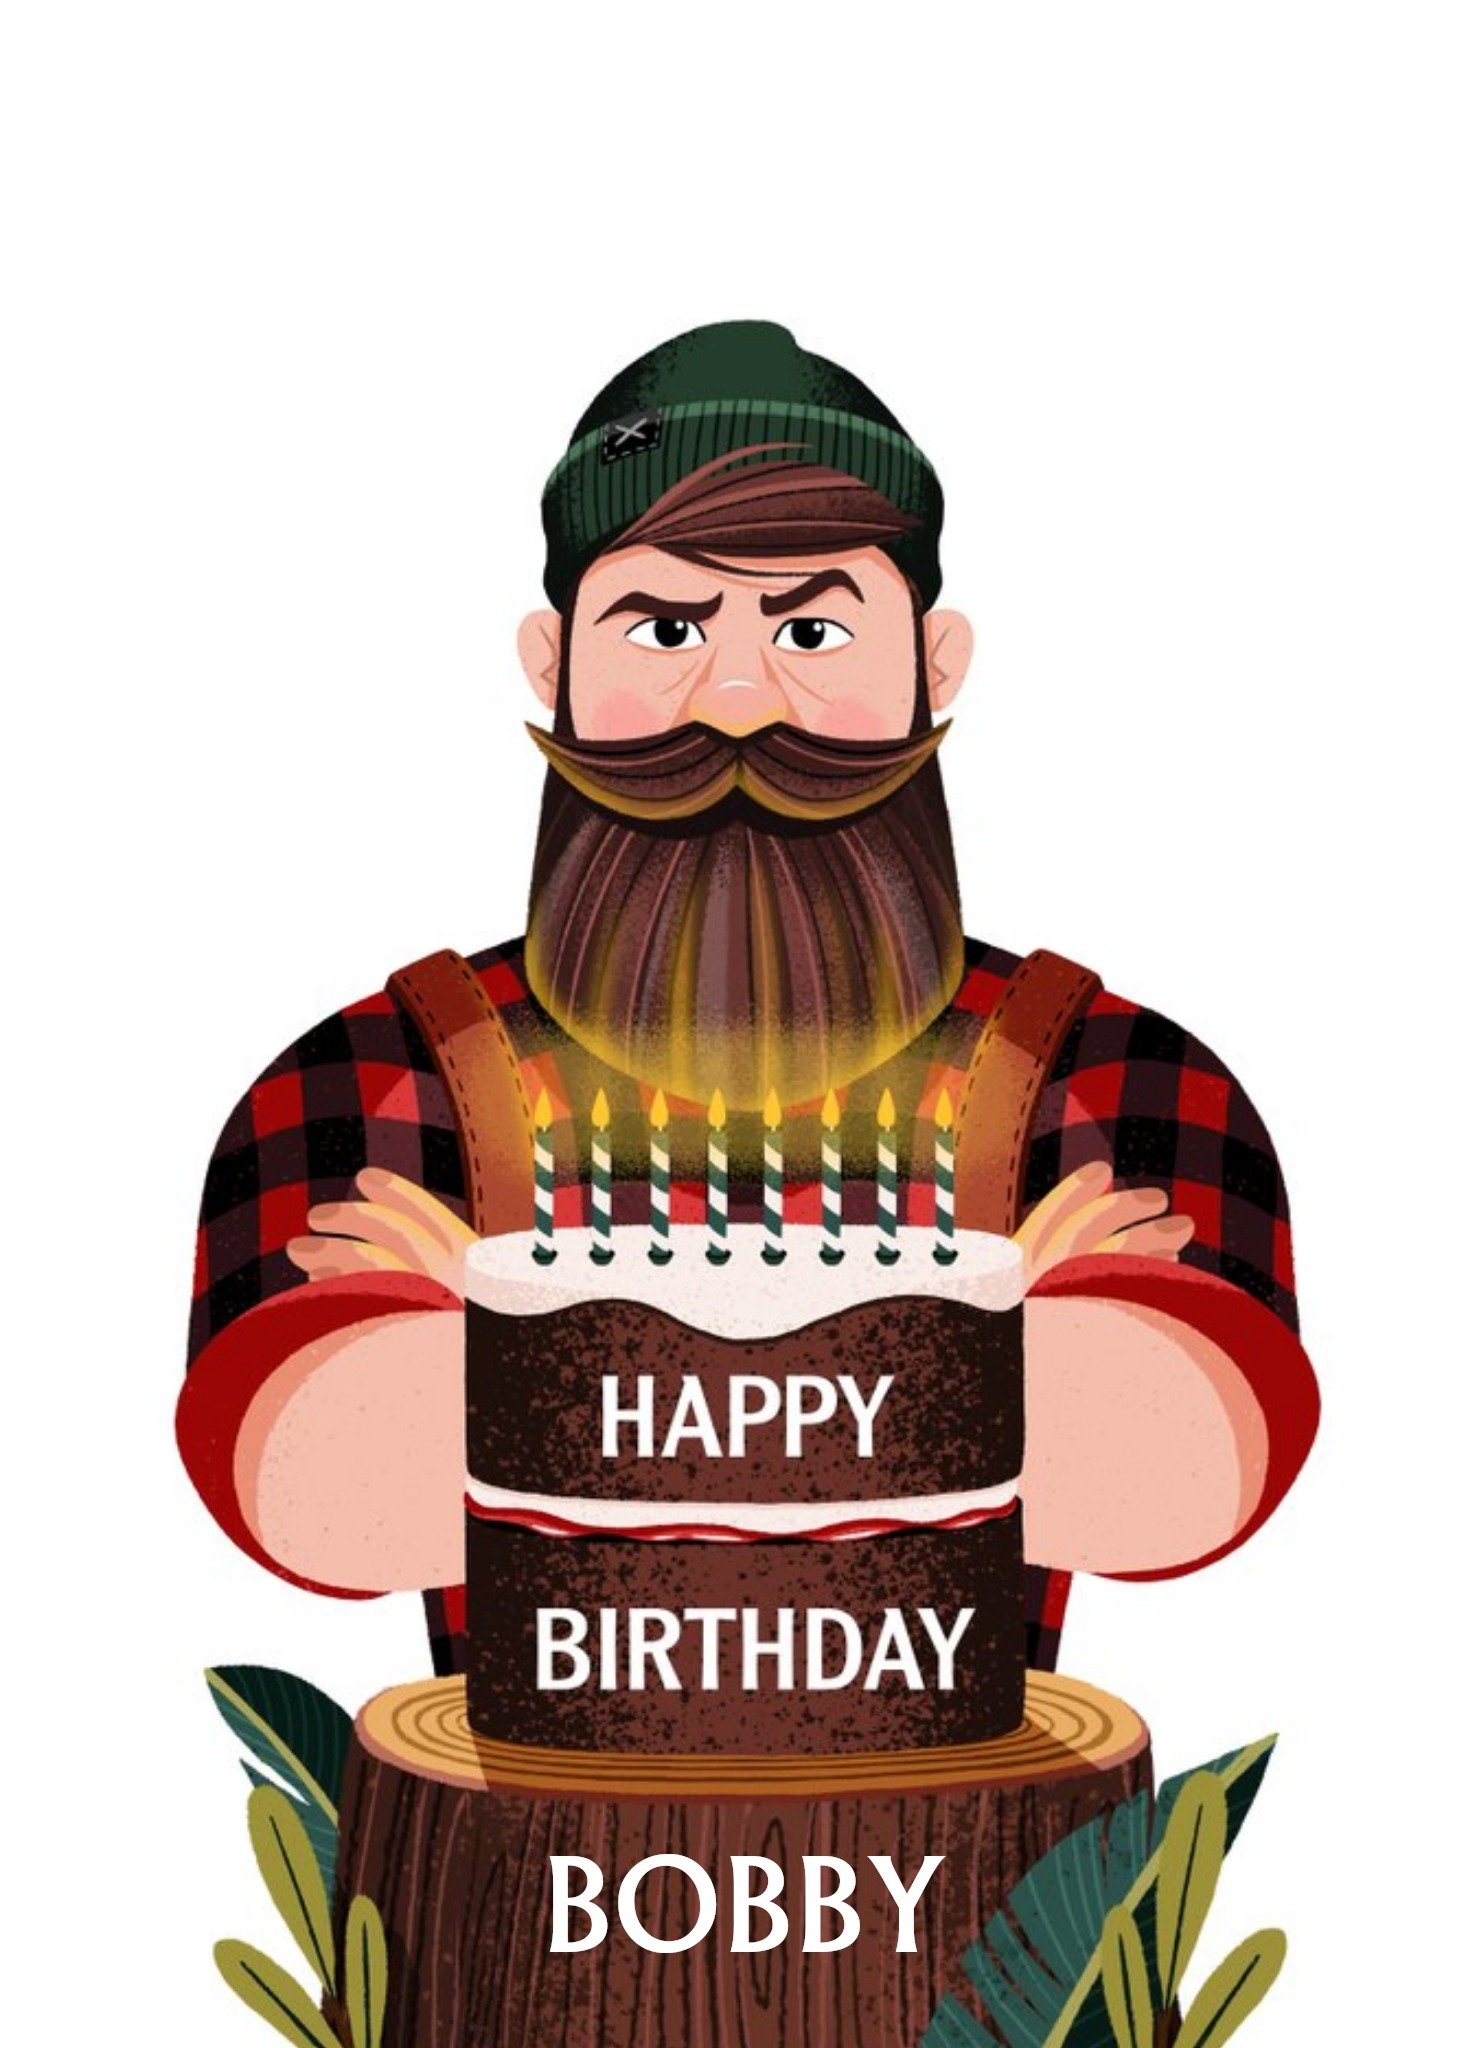 Moonpig Illustration Of A Bearded Lumberjack With A Birthday Cake Personalised Birthday Card, Large